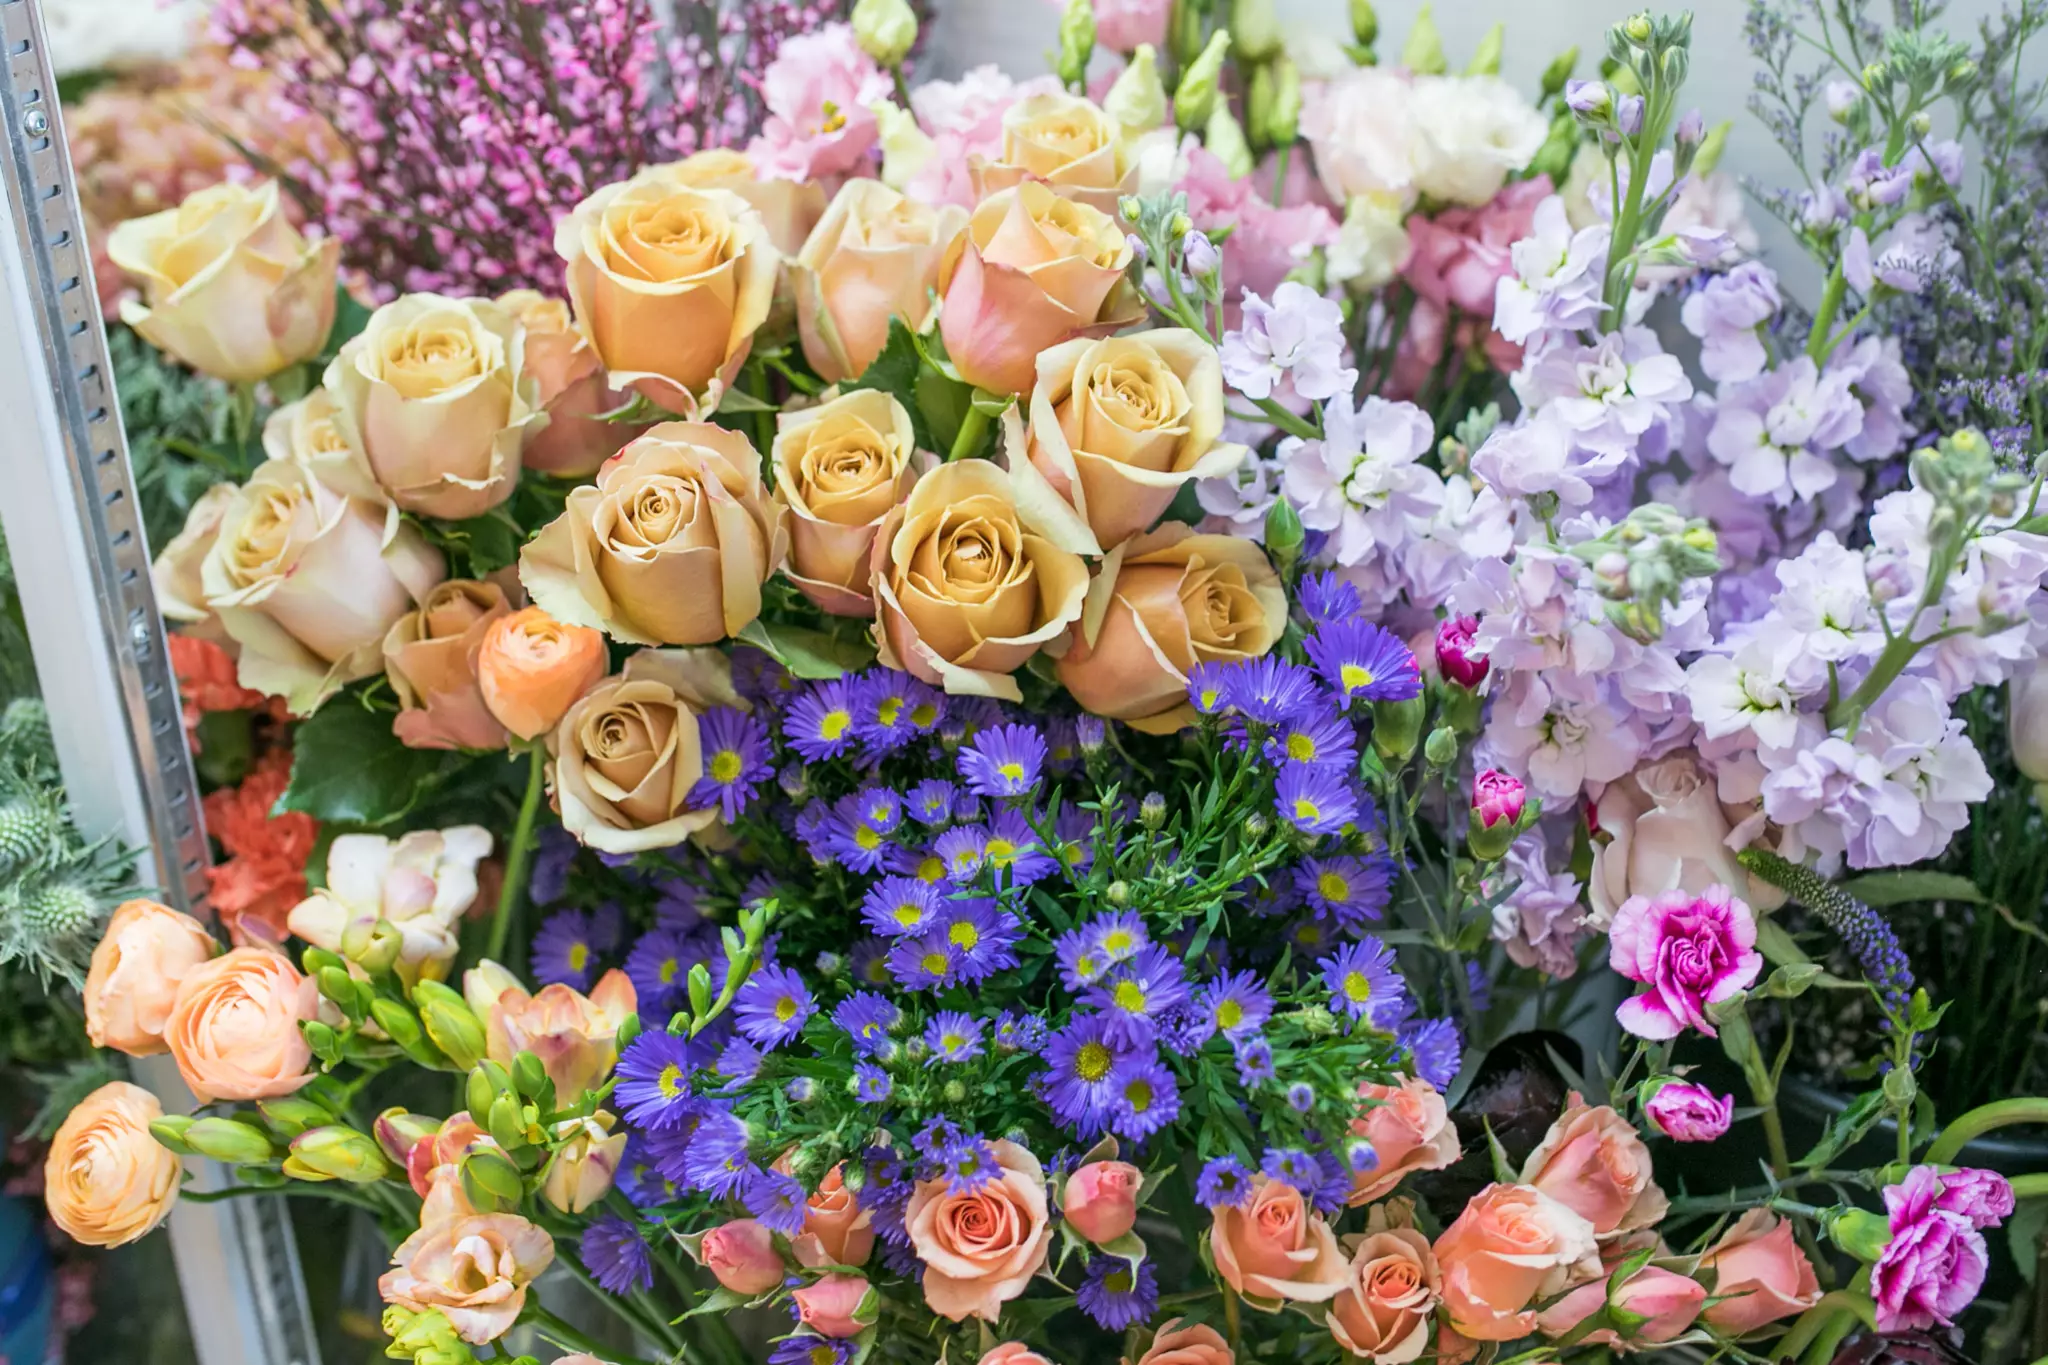 A beautiful bouquet of flowers is a great gift, no matter what the occasion is